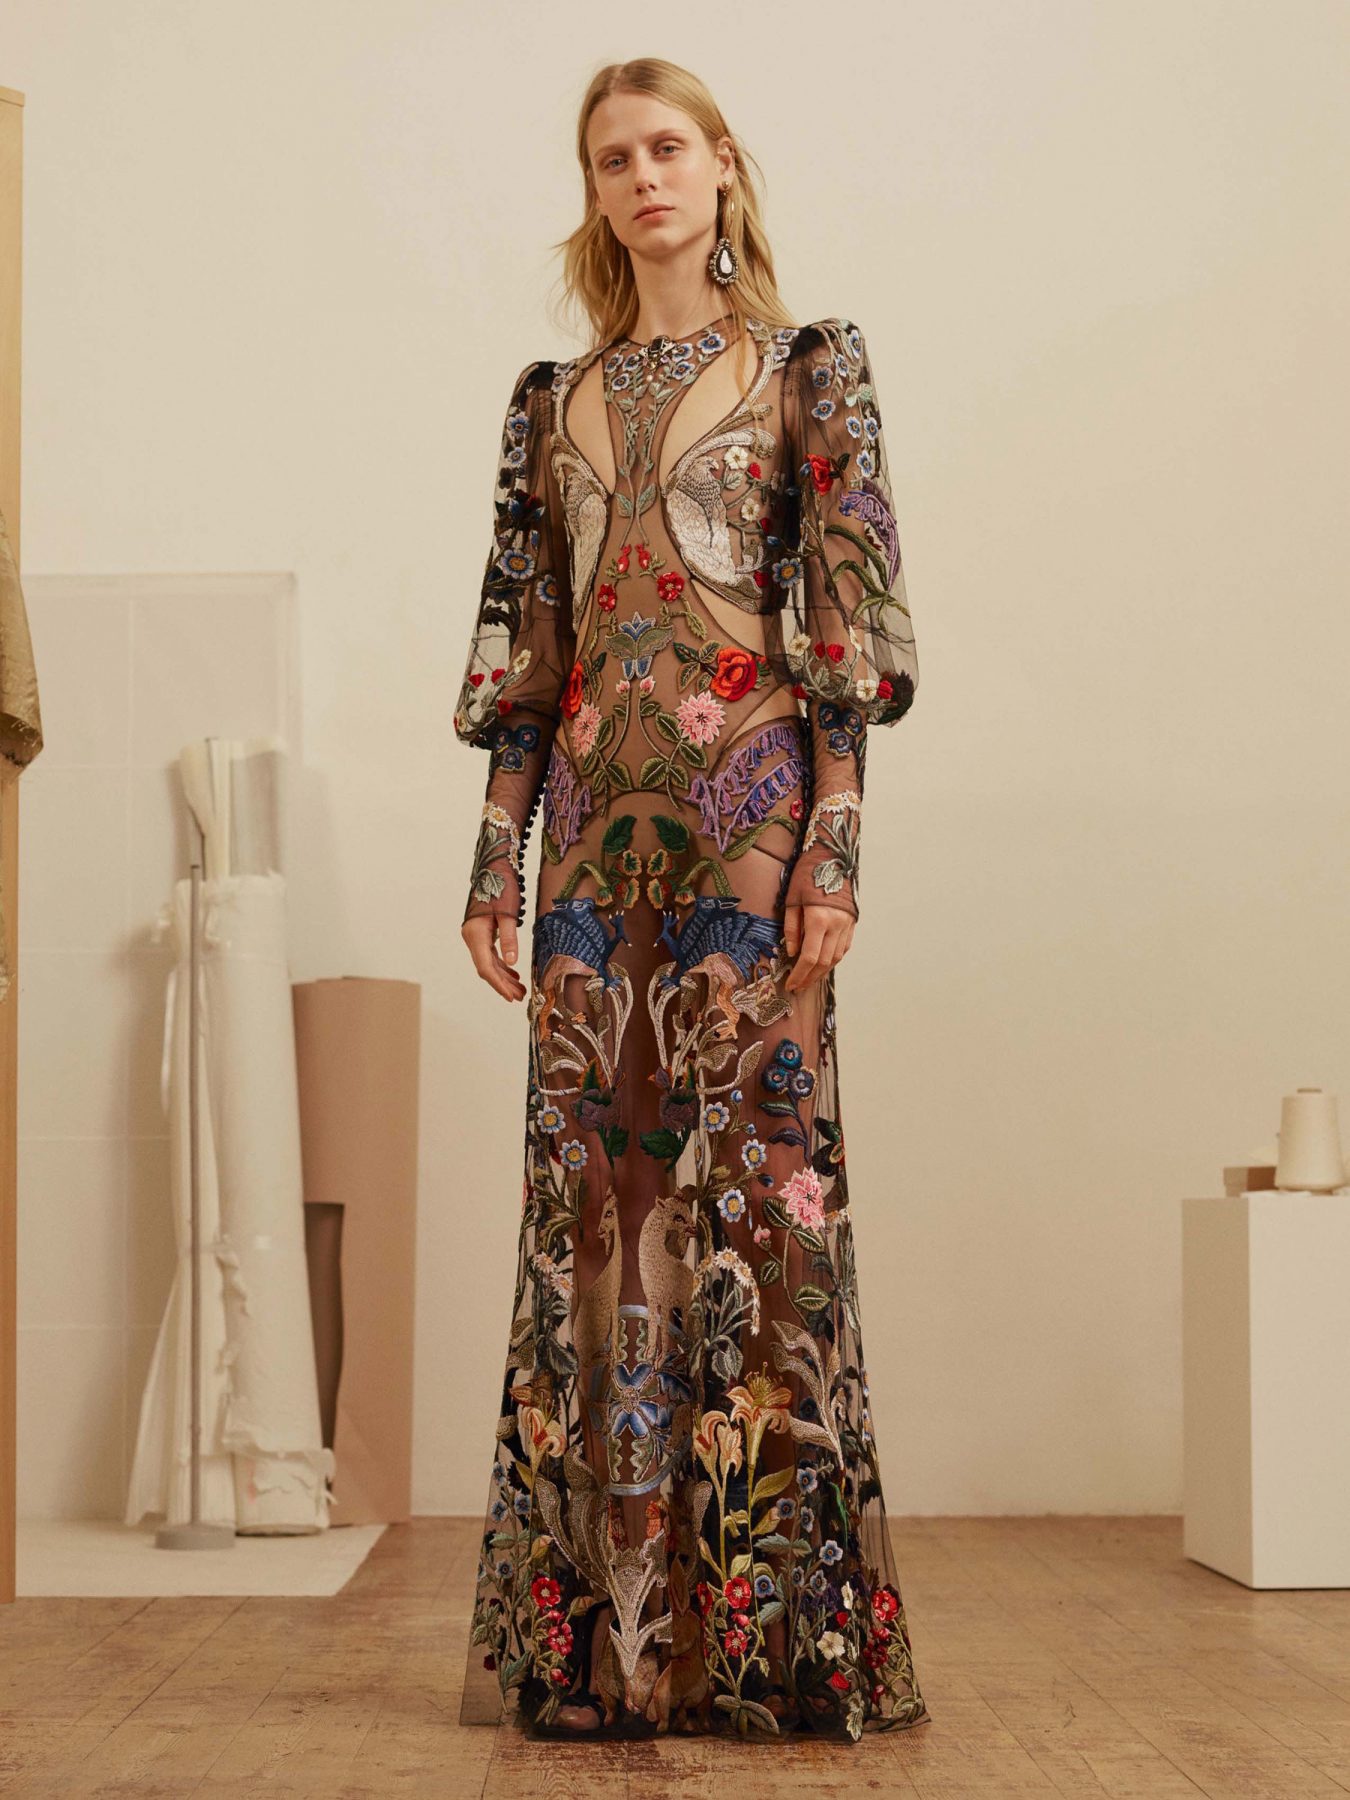 Image result for ALEXANDER MCQUEEN PRE-FALL 2017